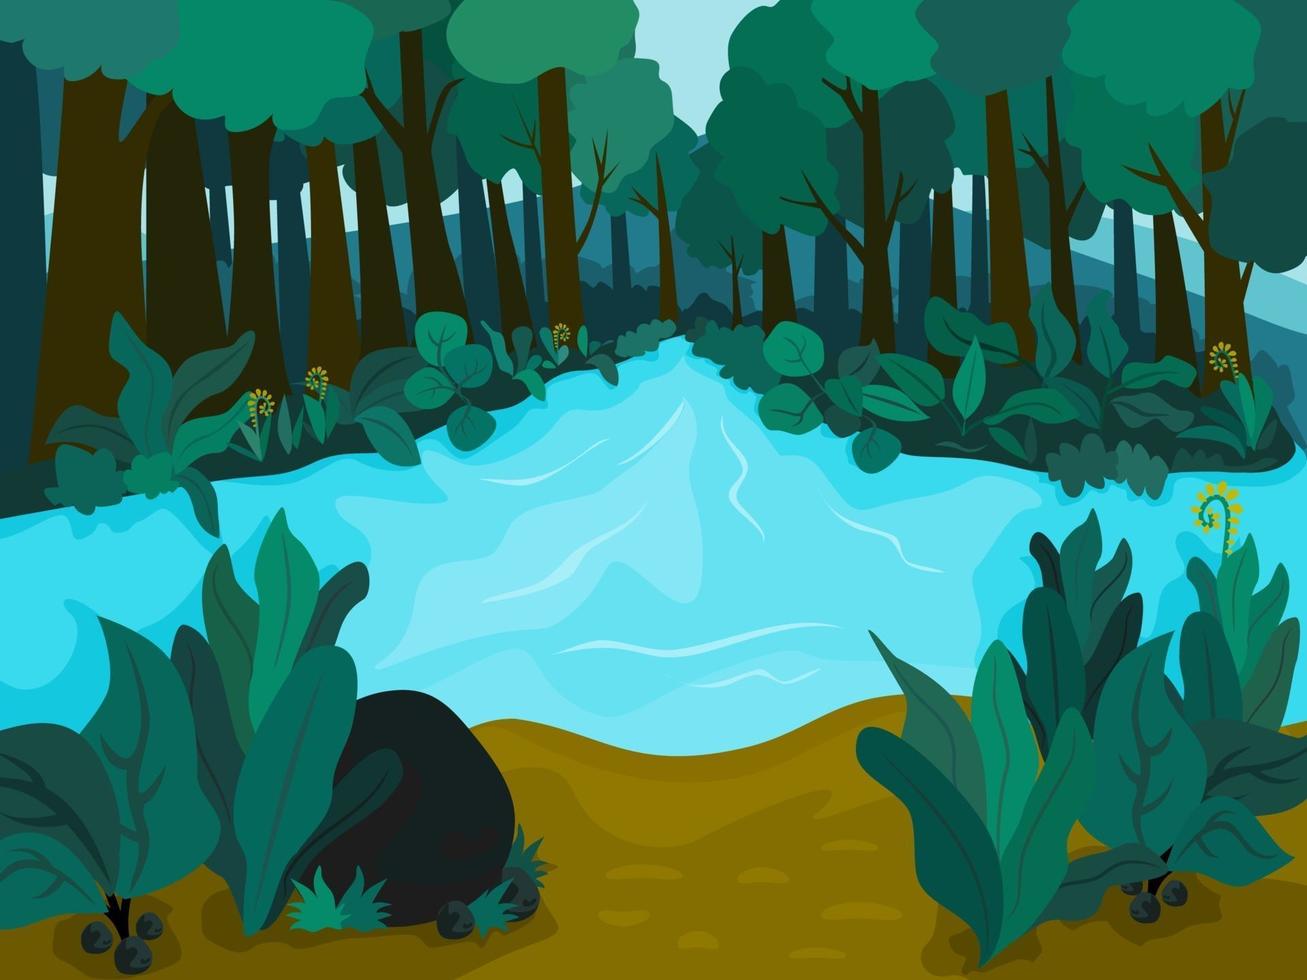 Background Vector Illustration of River in the forest.